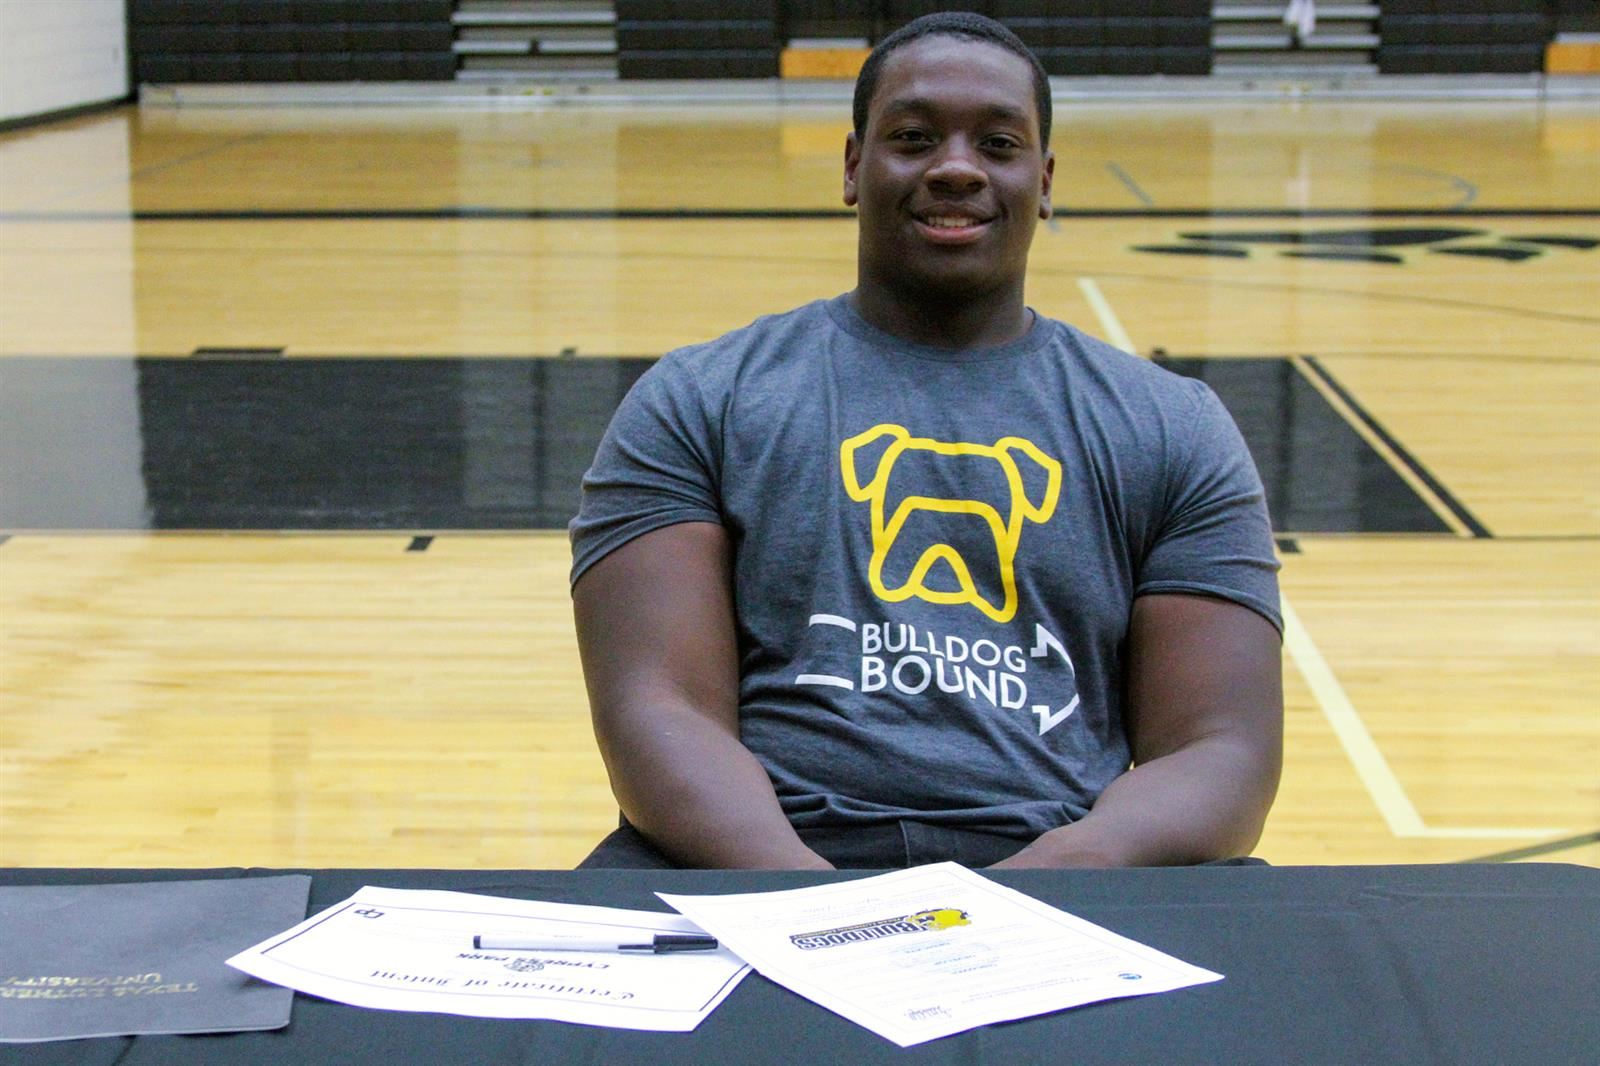 Cypress Park High School senior Jaylon Simien signed his letter of intent to play football at Texas Lutheran University.